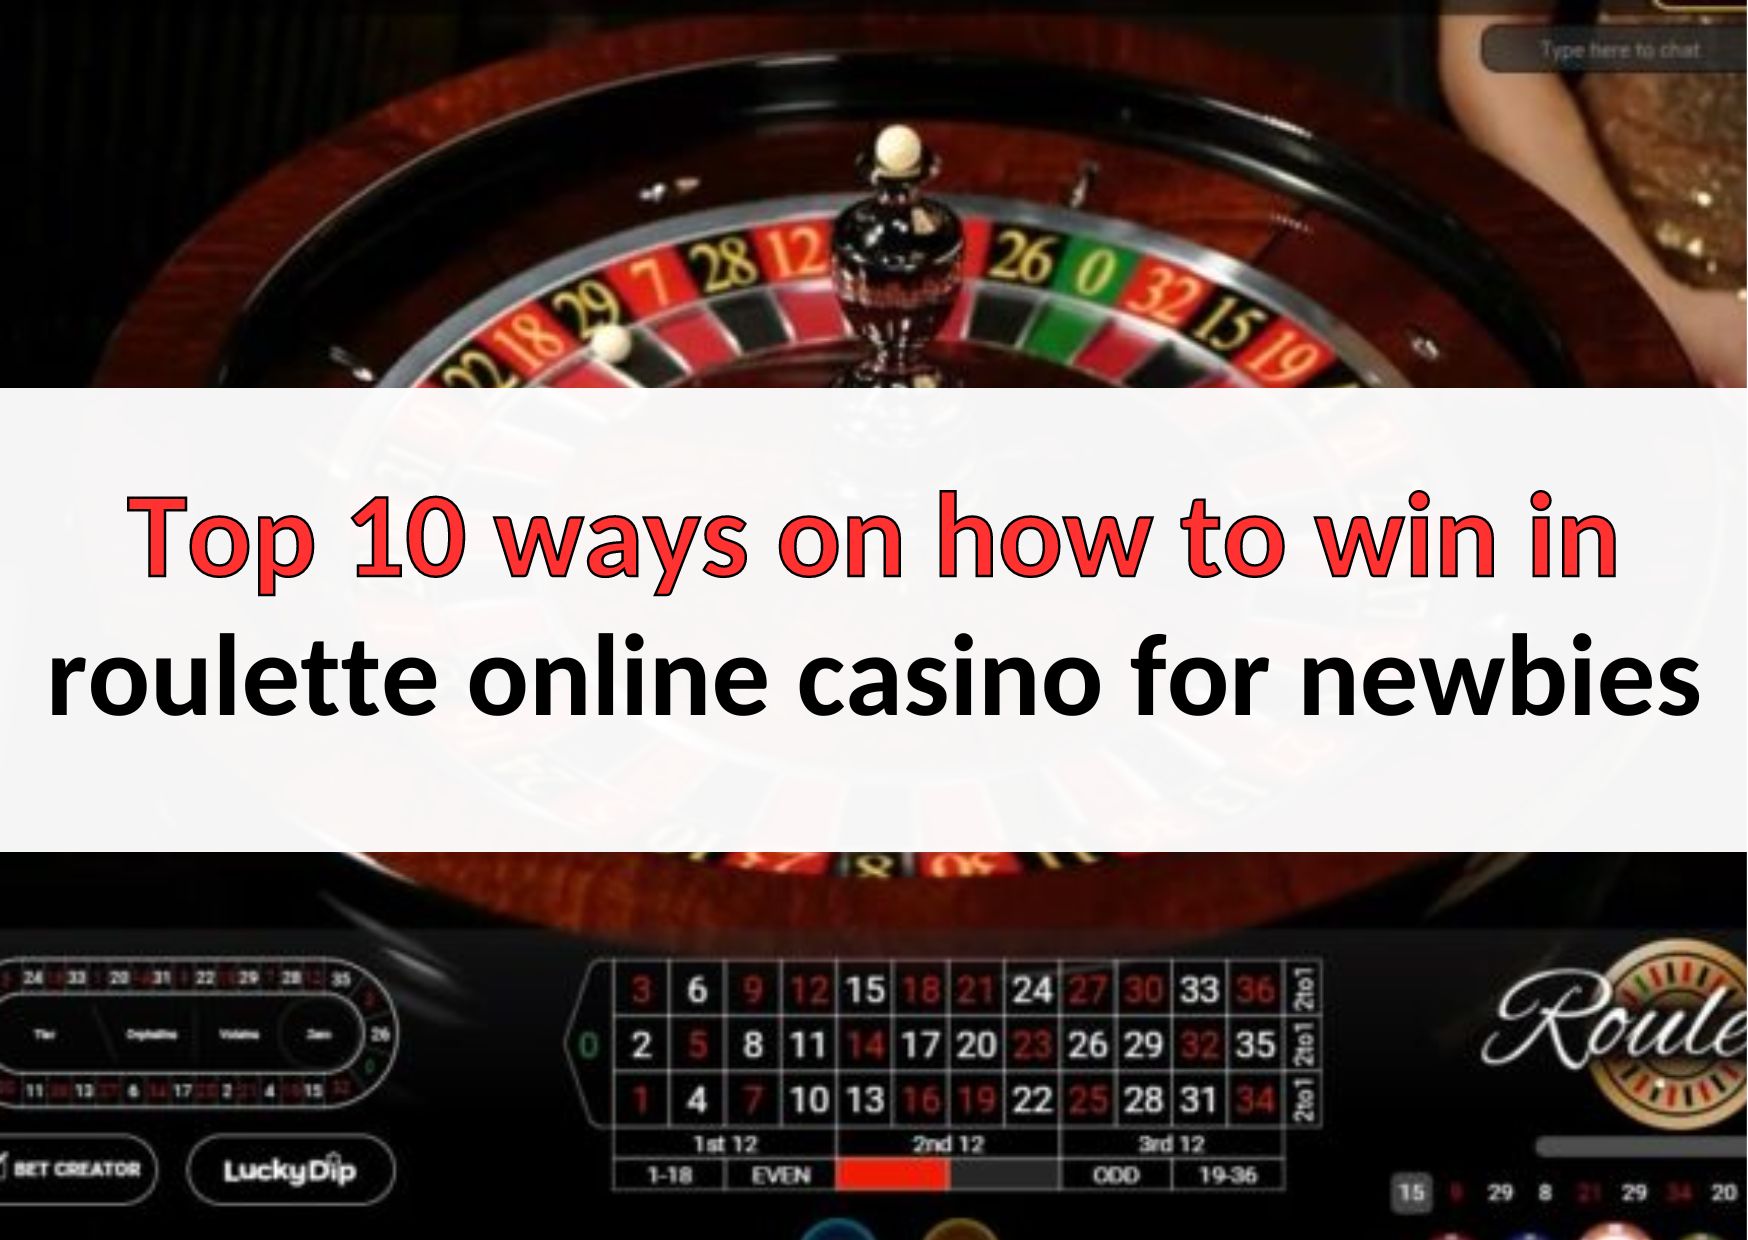 10 ways on how to win roulette online